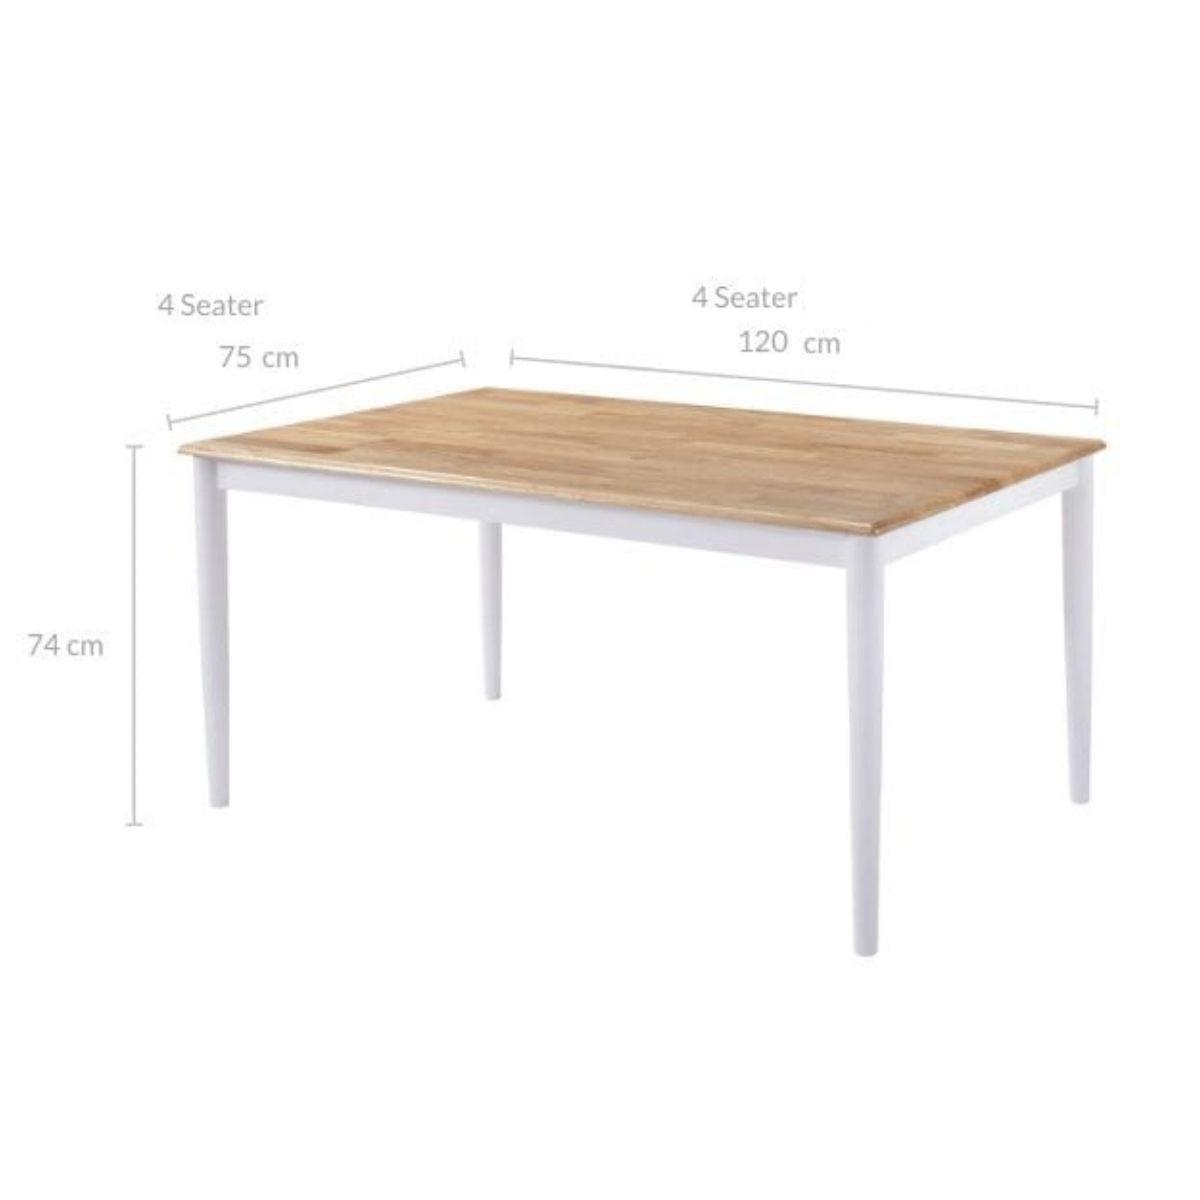 Lory 1.2m 4 seater dining table- Natural + White